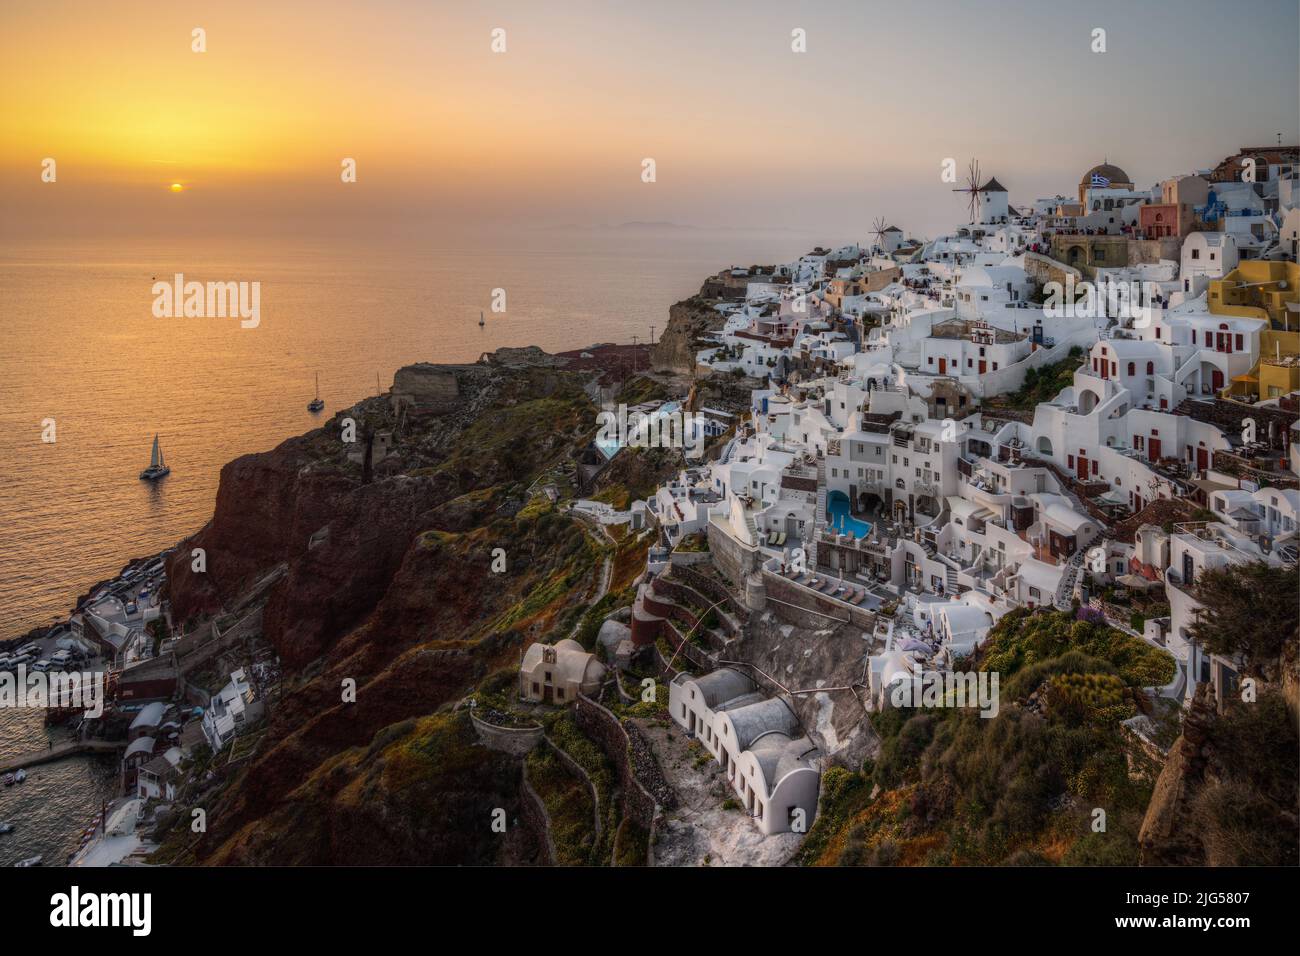 Amazing sunset at Oia, the most typical village of Santorini, Greece Stock Photo